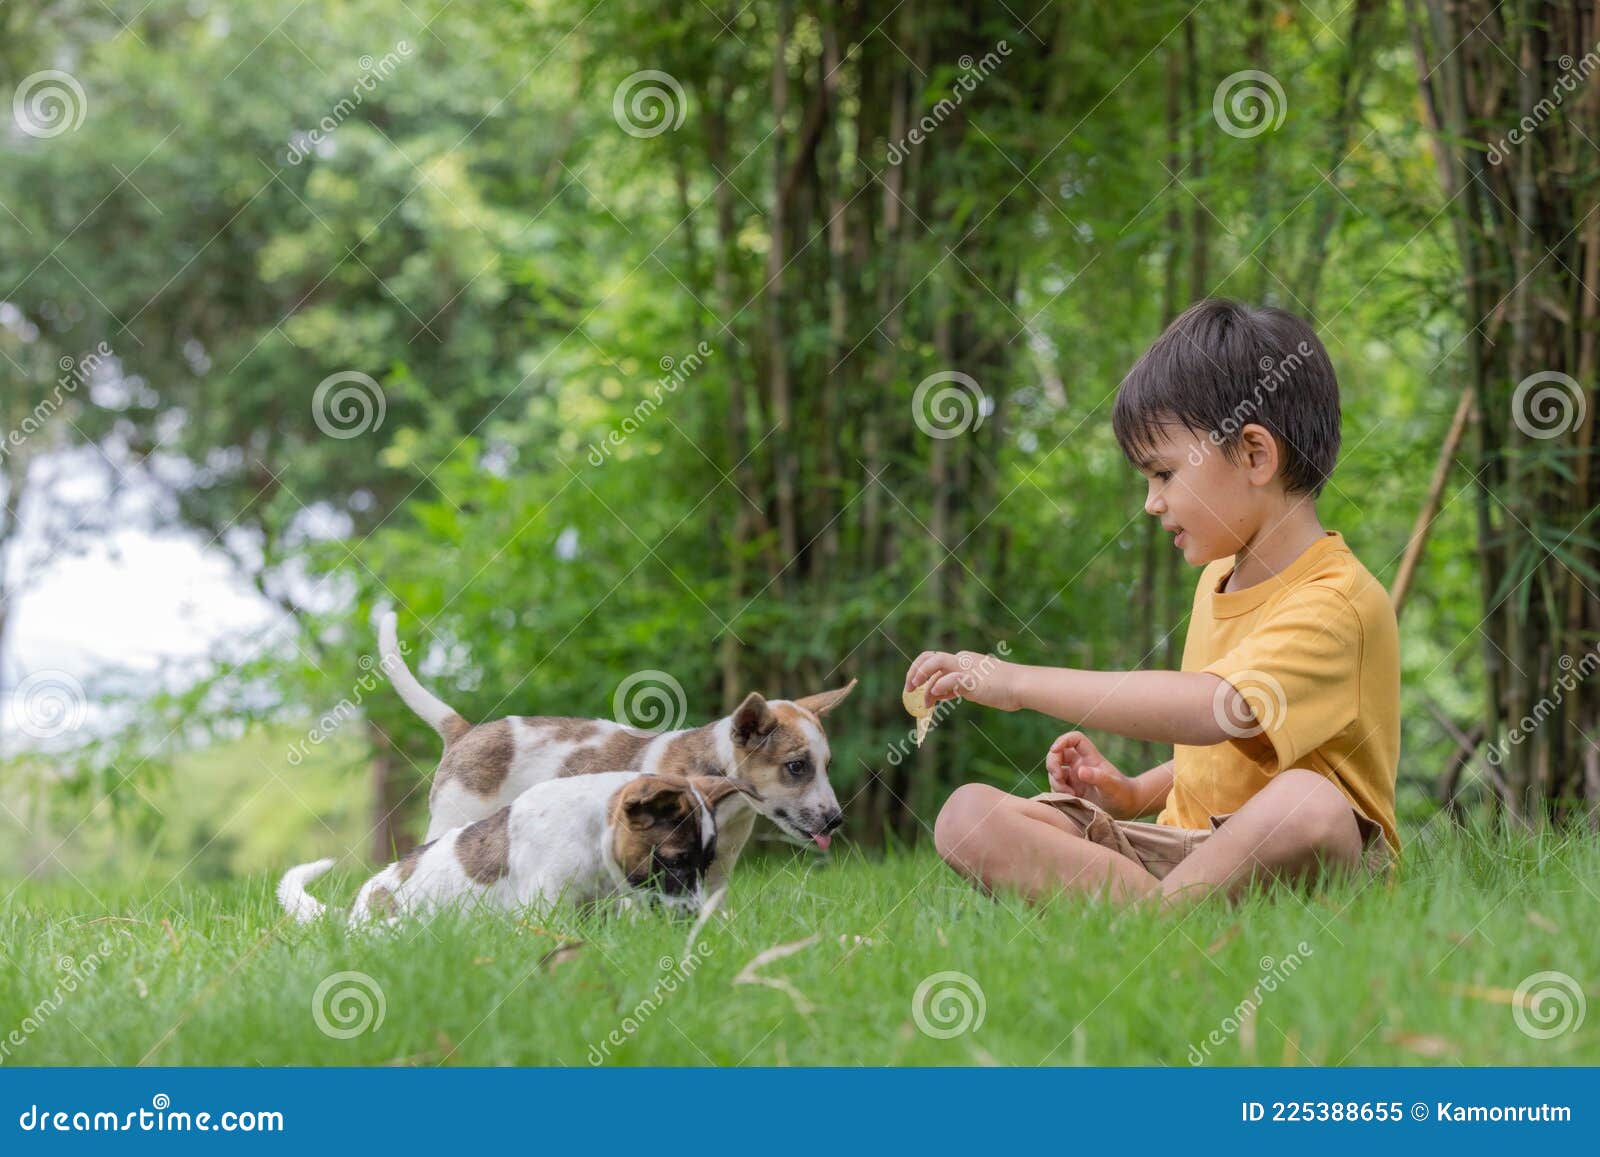 6. Happy little boy with blonde hair and his pet dog - wide 6